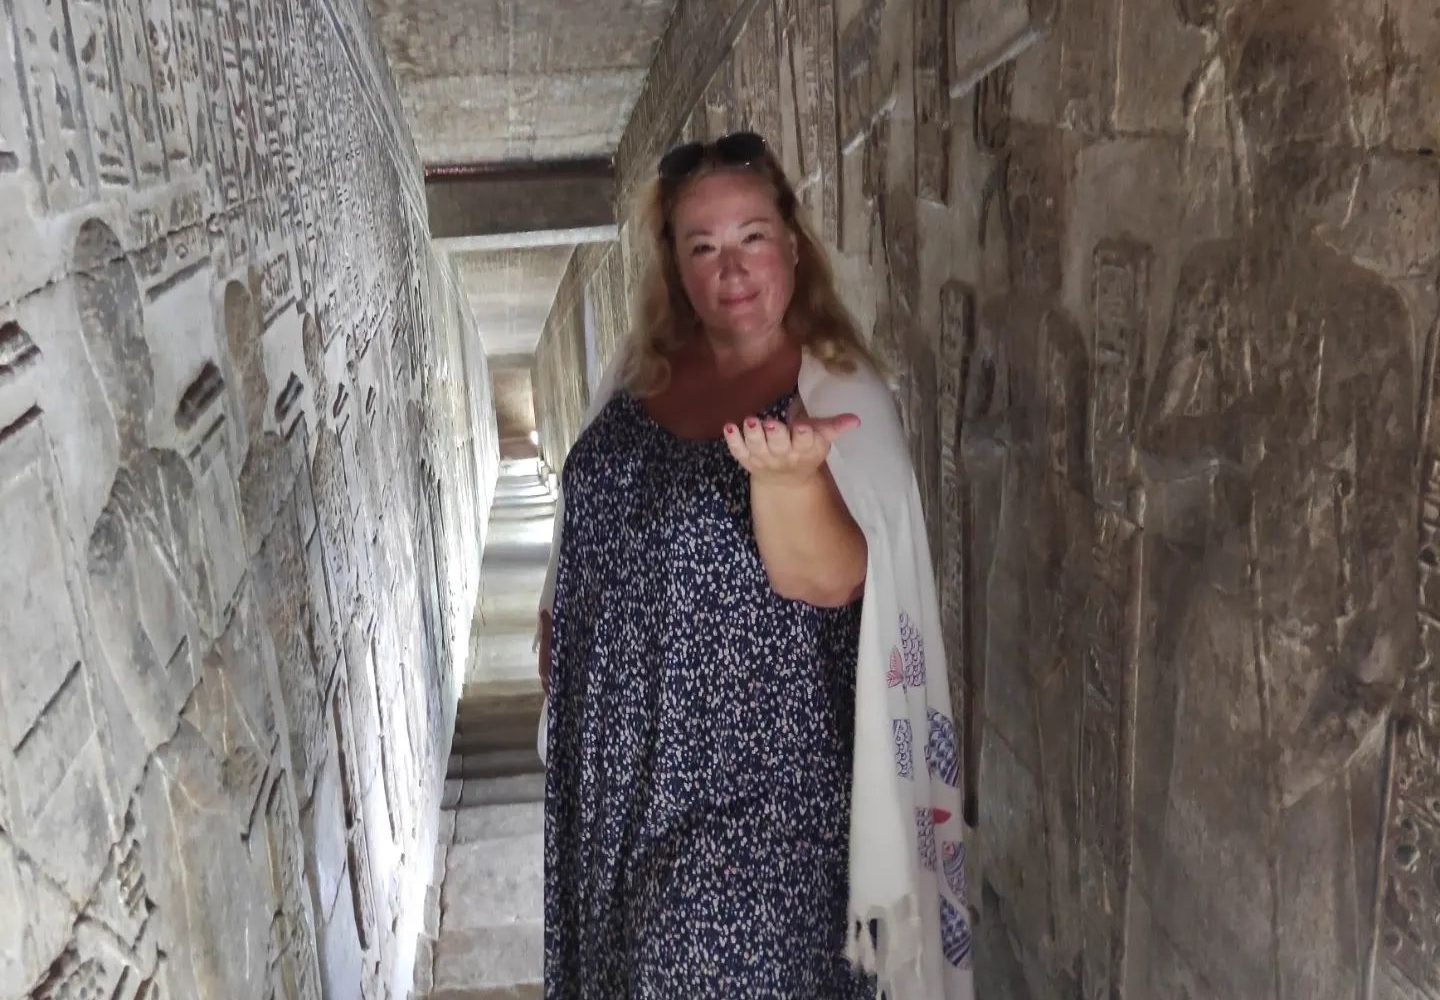 Day Trip Dendera Temple from Hurghada